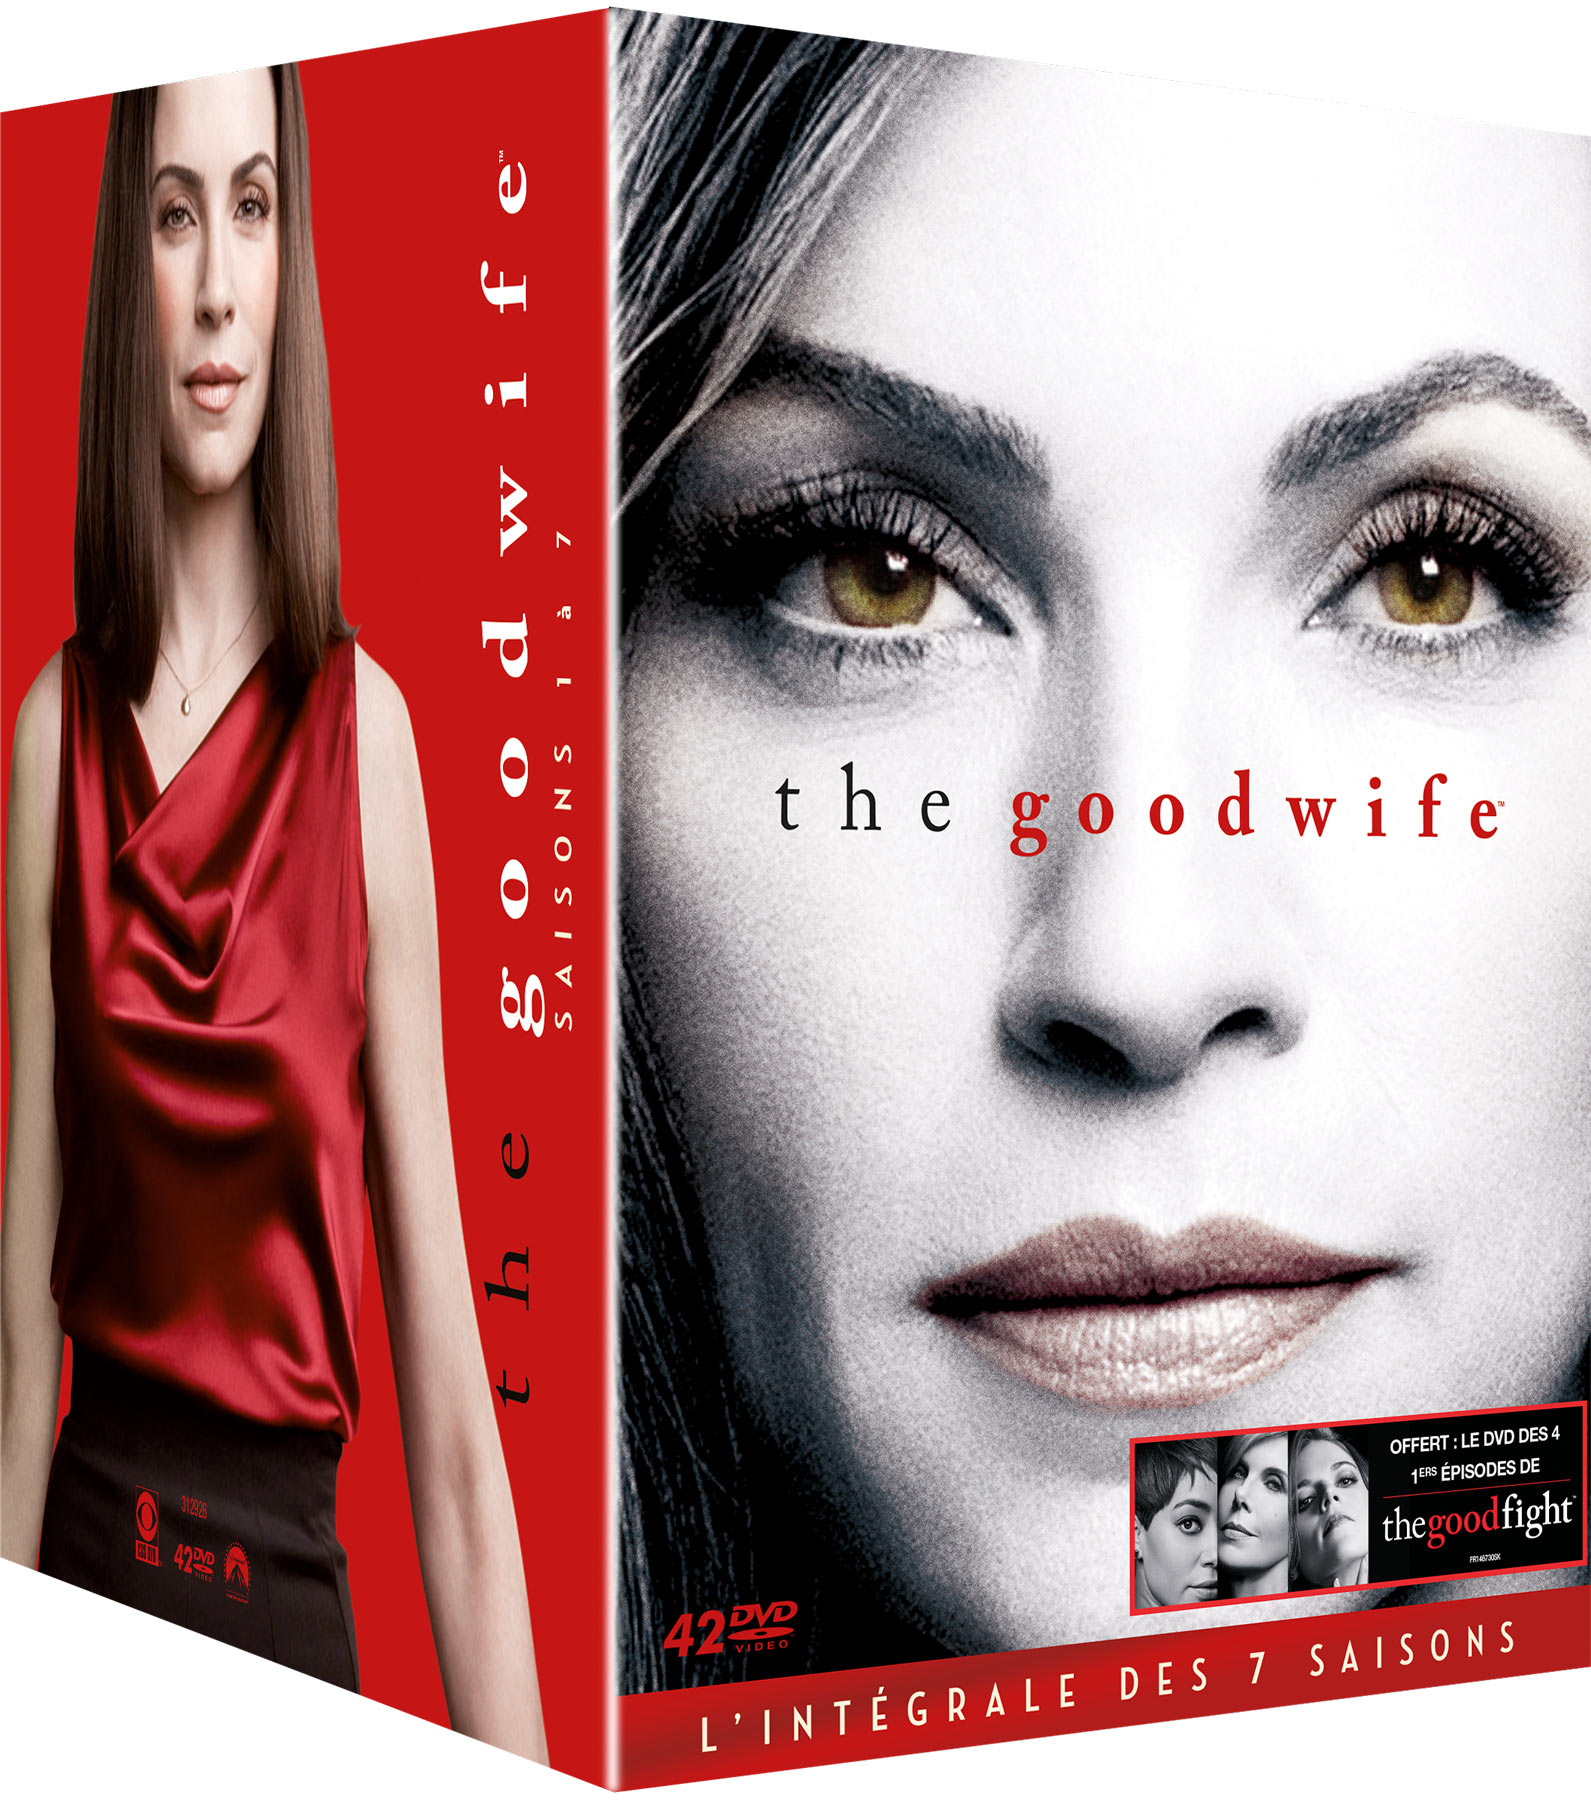 THE GOOD WIFE S01 A S07